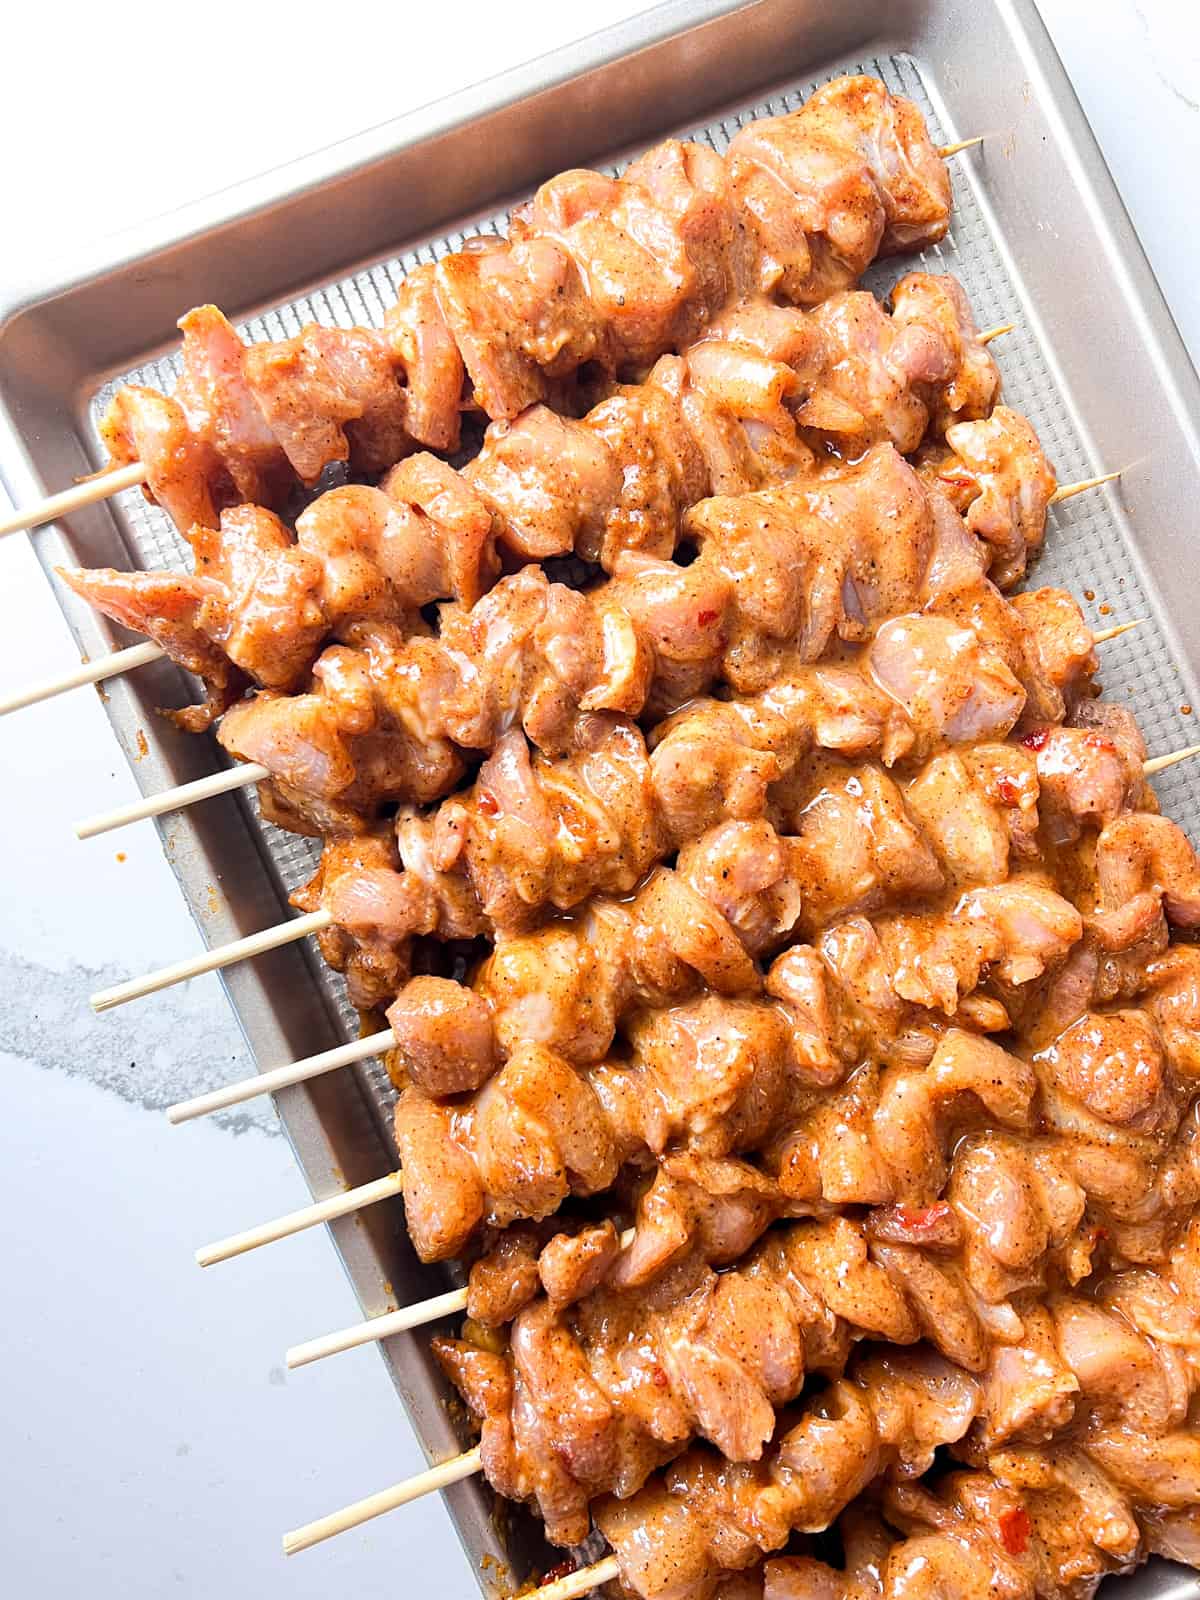 Marinated and skewered chicken thighs.